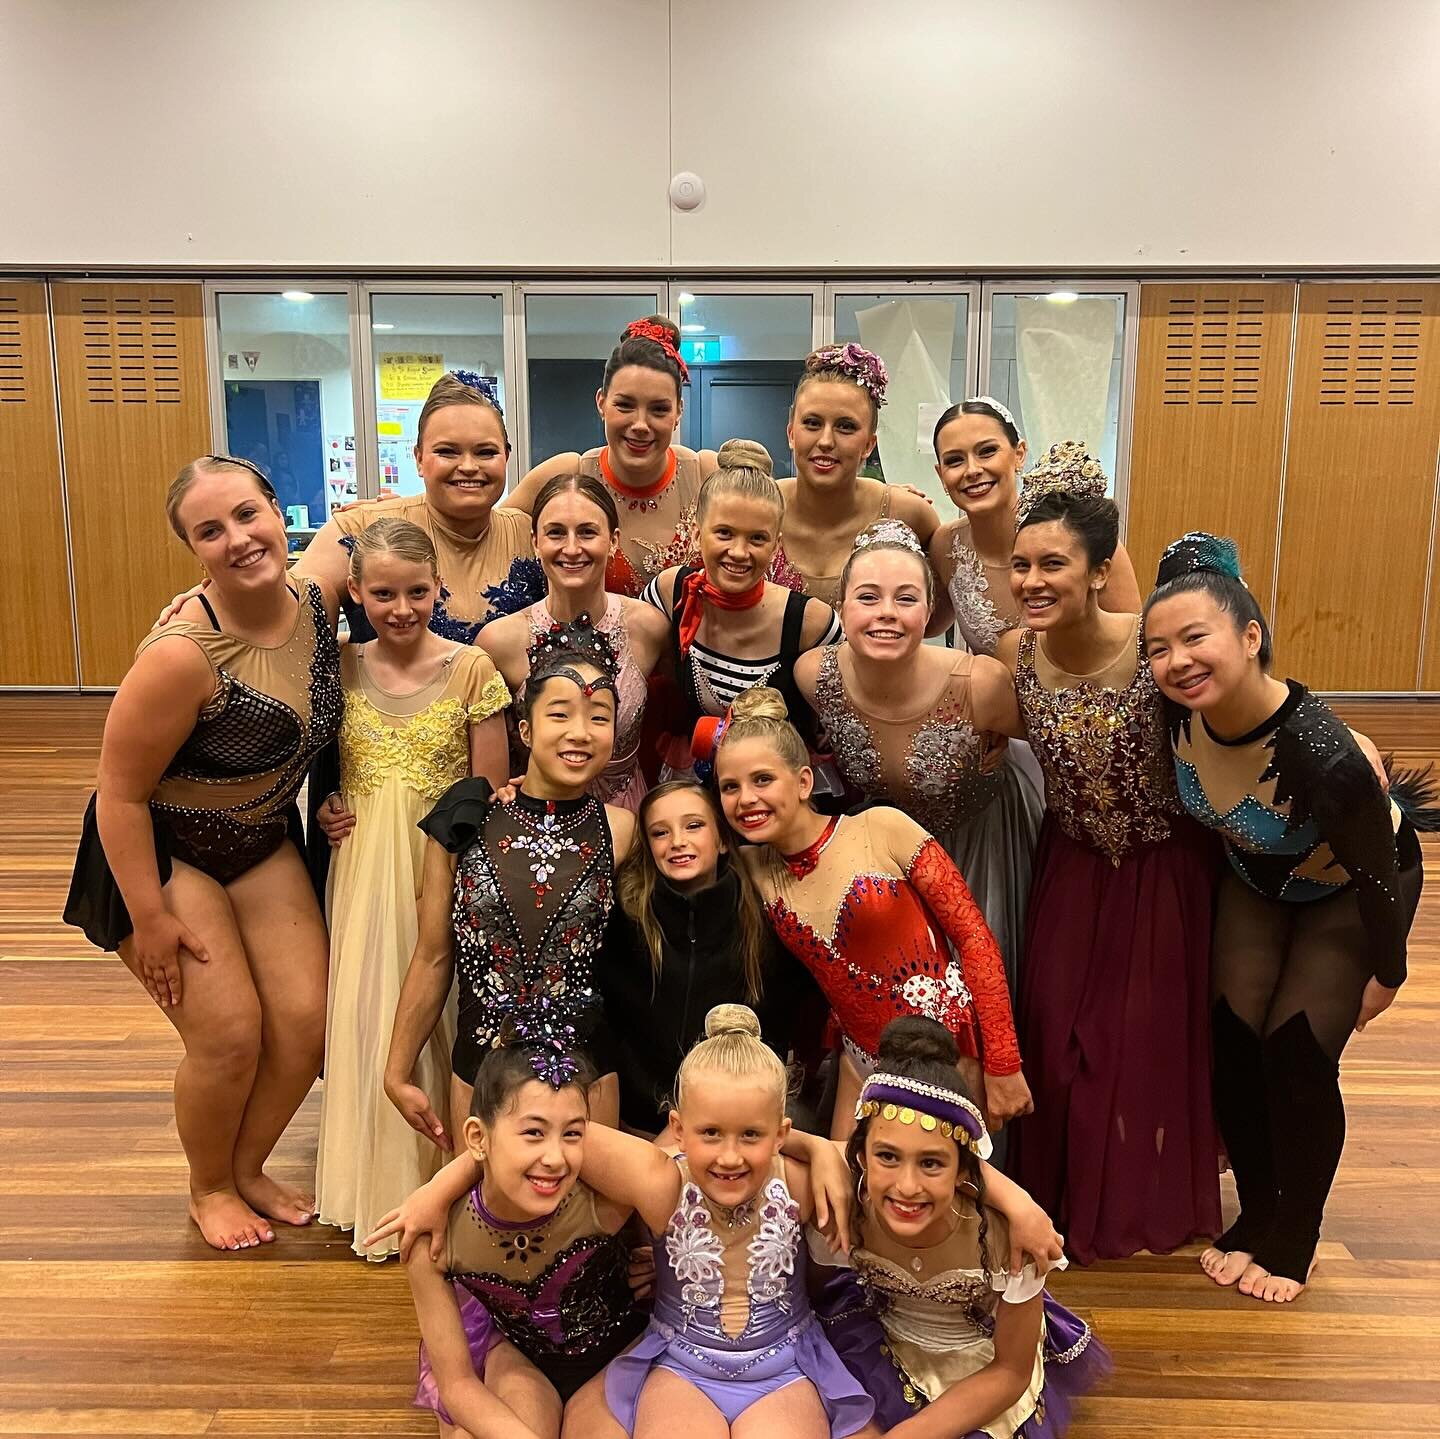 On Friday we had our Solo Dress Rehearsal!

Fantastic work from each and every one of our girls who stepped up to showcase their hard work! We can&rsquo;t wait to see you at competitions 🏆

Fun Fact - We have grown from having only 3 soloists to ove